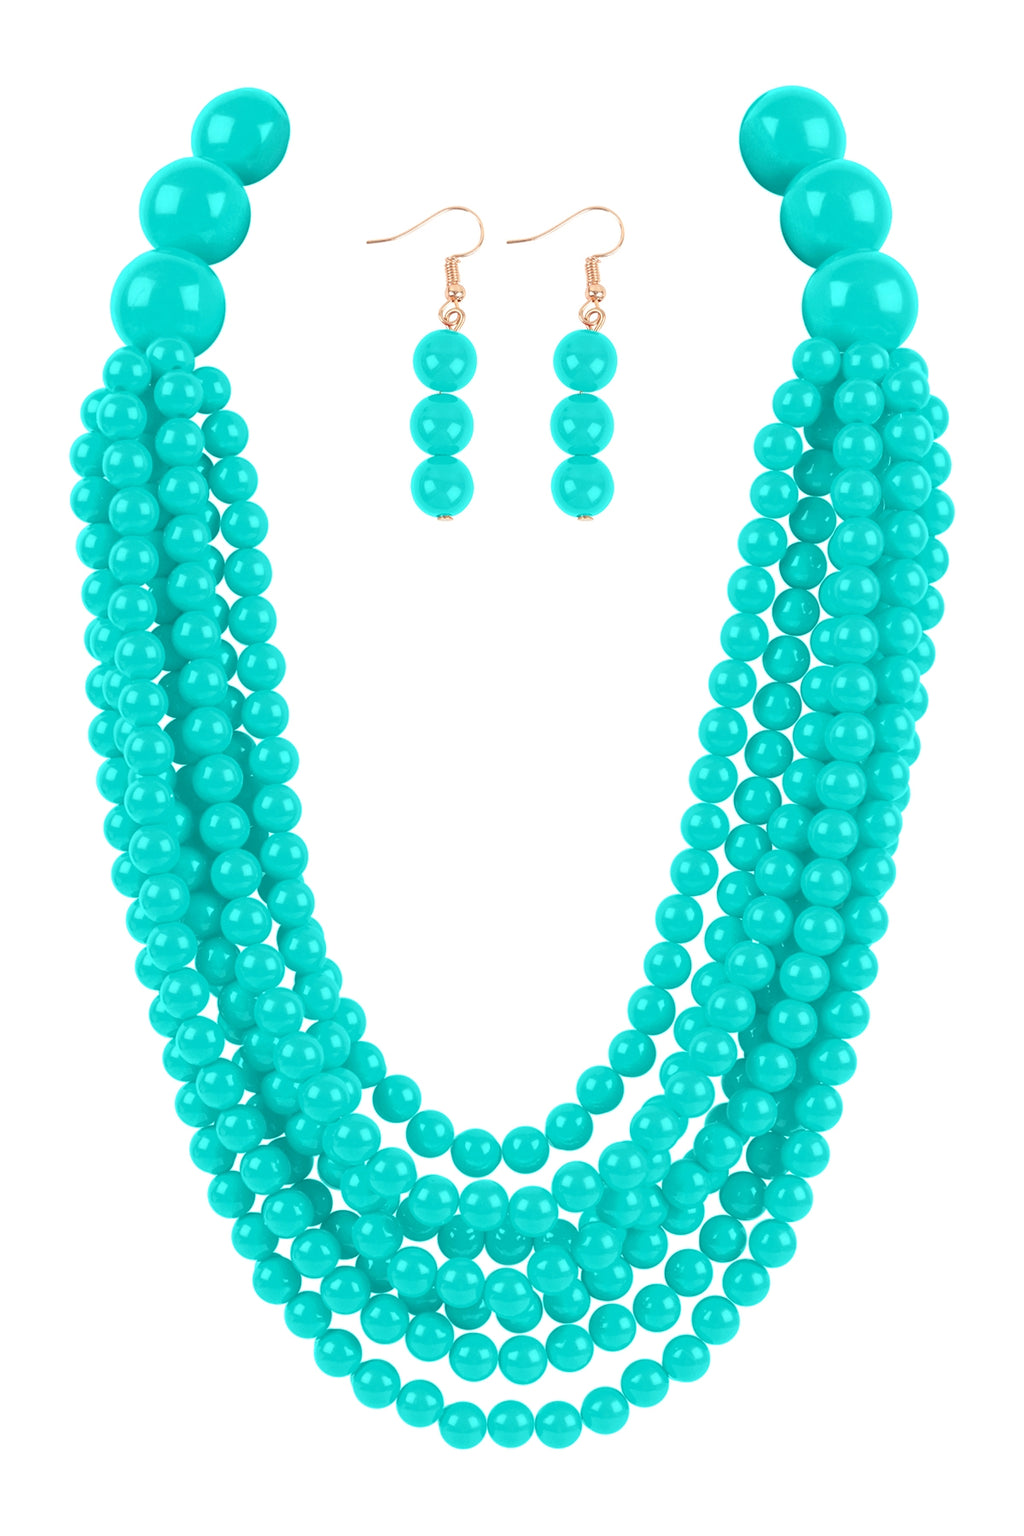 Round Bead Layered Statement Necklace and Earring Set Turquoise - Pack of 6